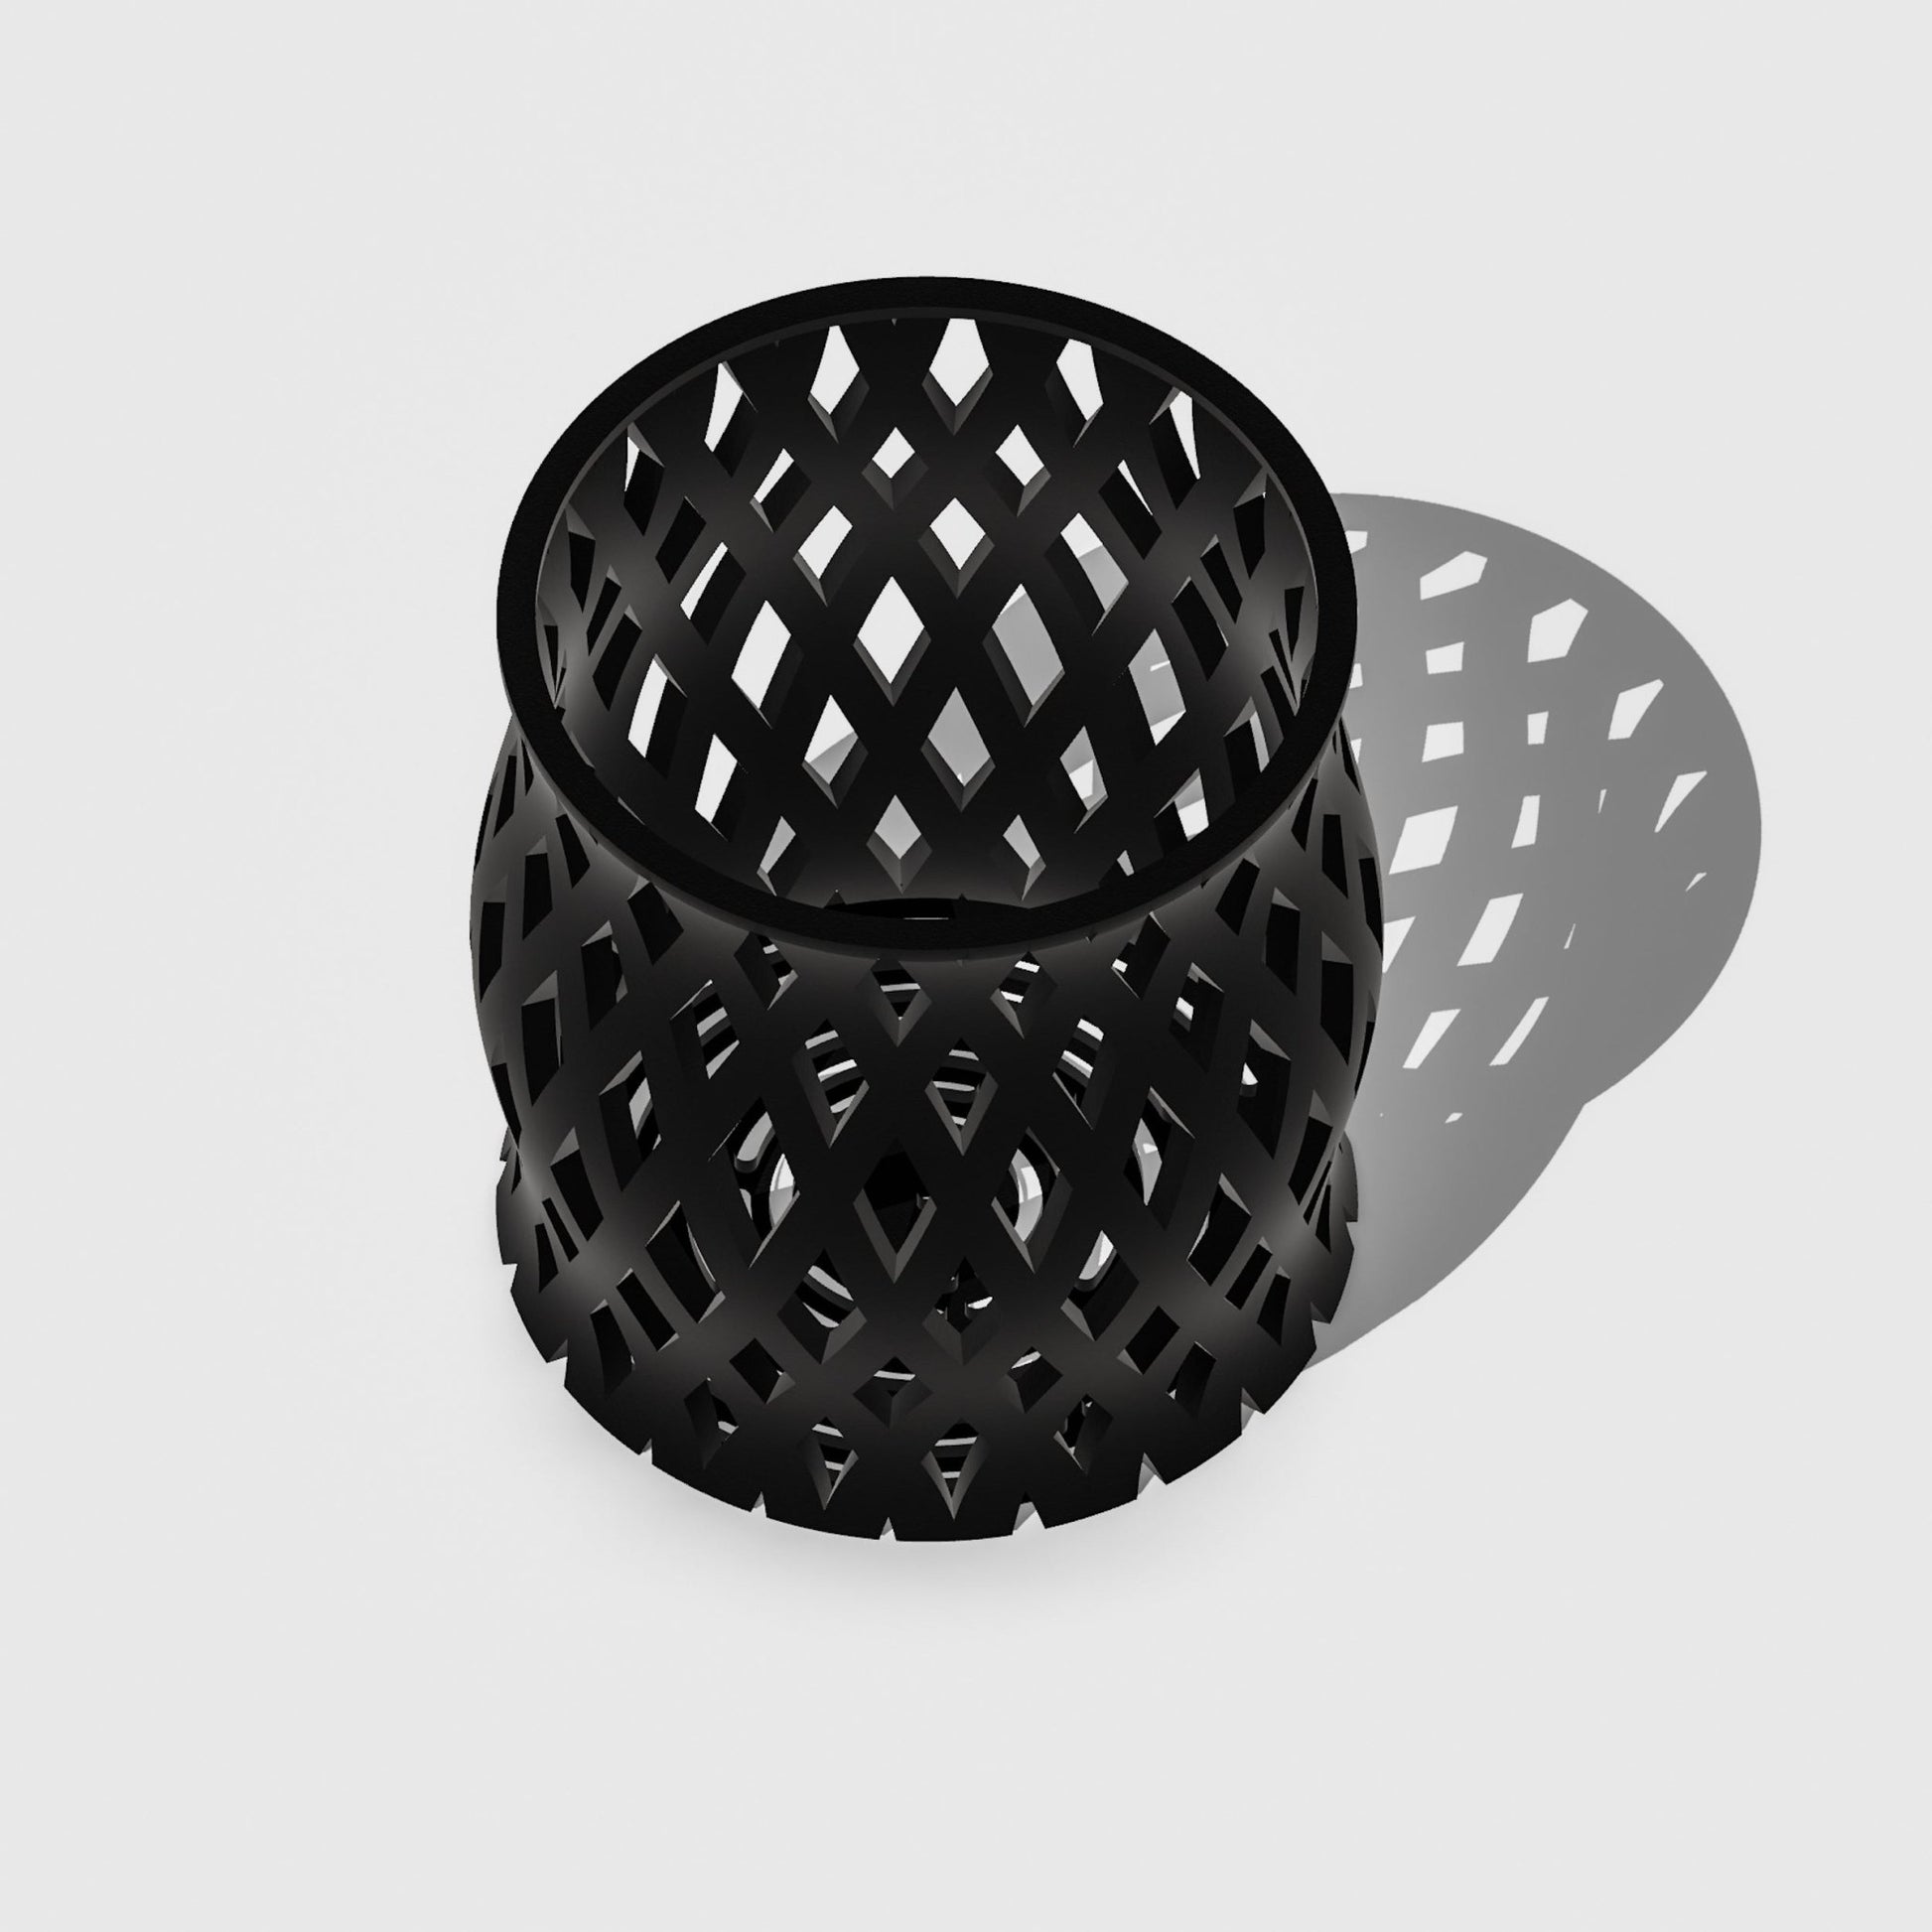 Unique Orchid Pot, Plant Pot with Drainage and Saucer, 3D Printed Planter, Use Leca & Aroid Mixes, Matte Beige, Lightweight, Philodendron "CAPRICIOUS" - Rosebud HomeGoods Black 4 inch Without Drip Tray MODERN HOME GOOD